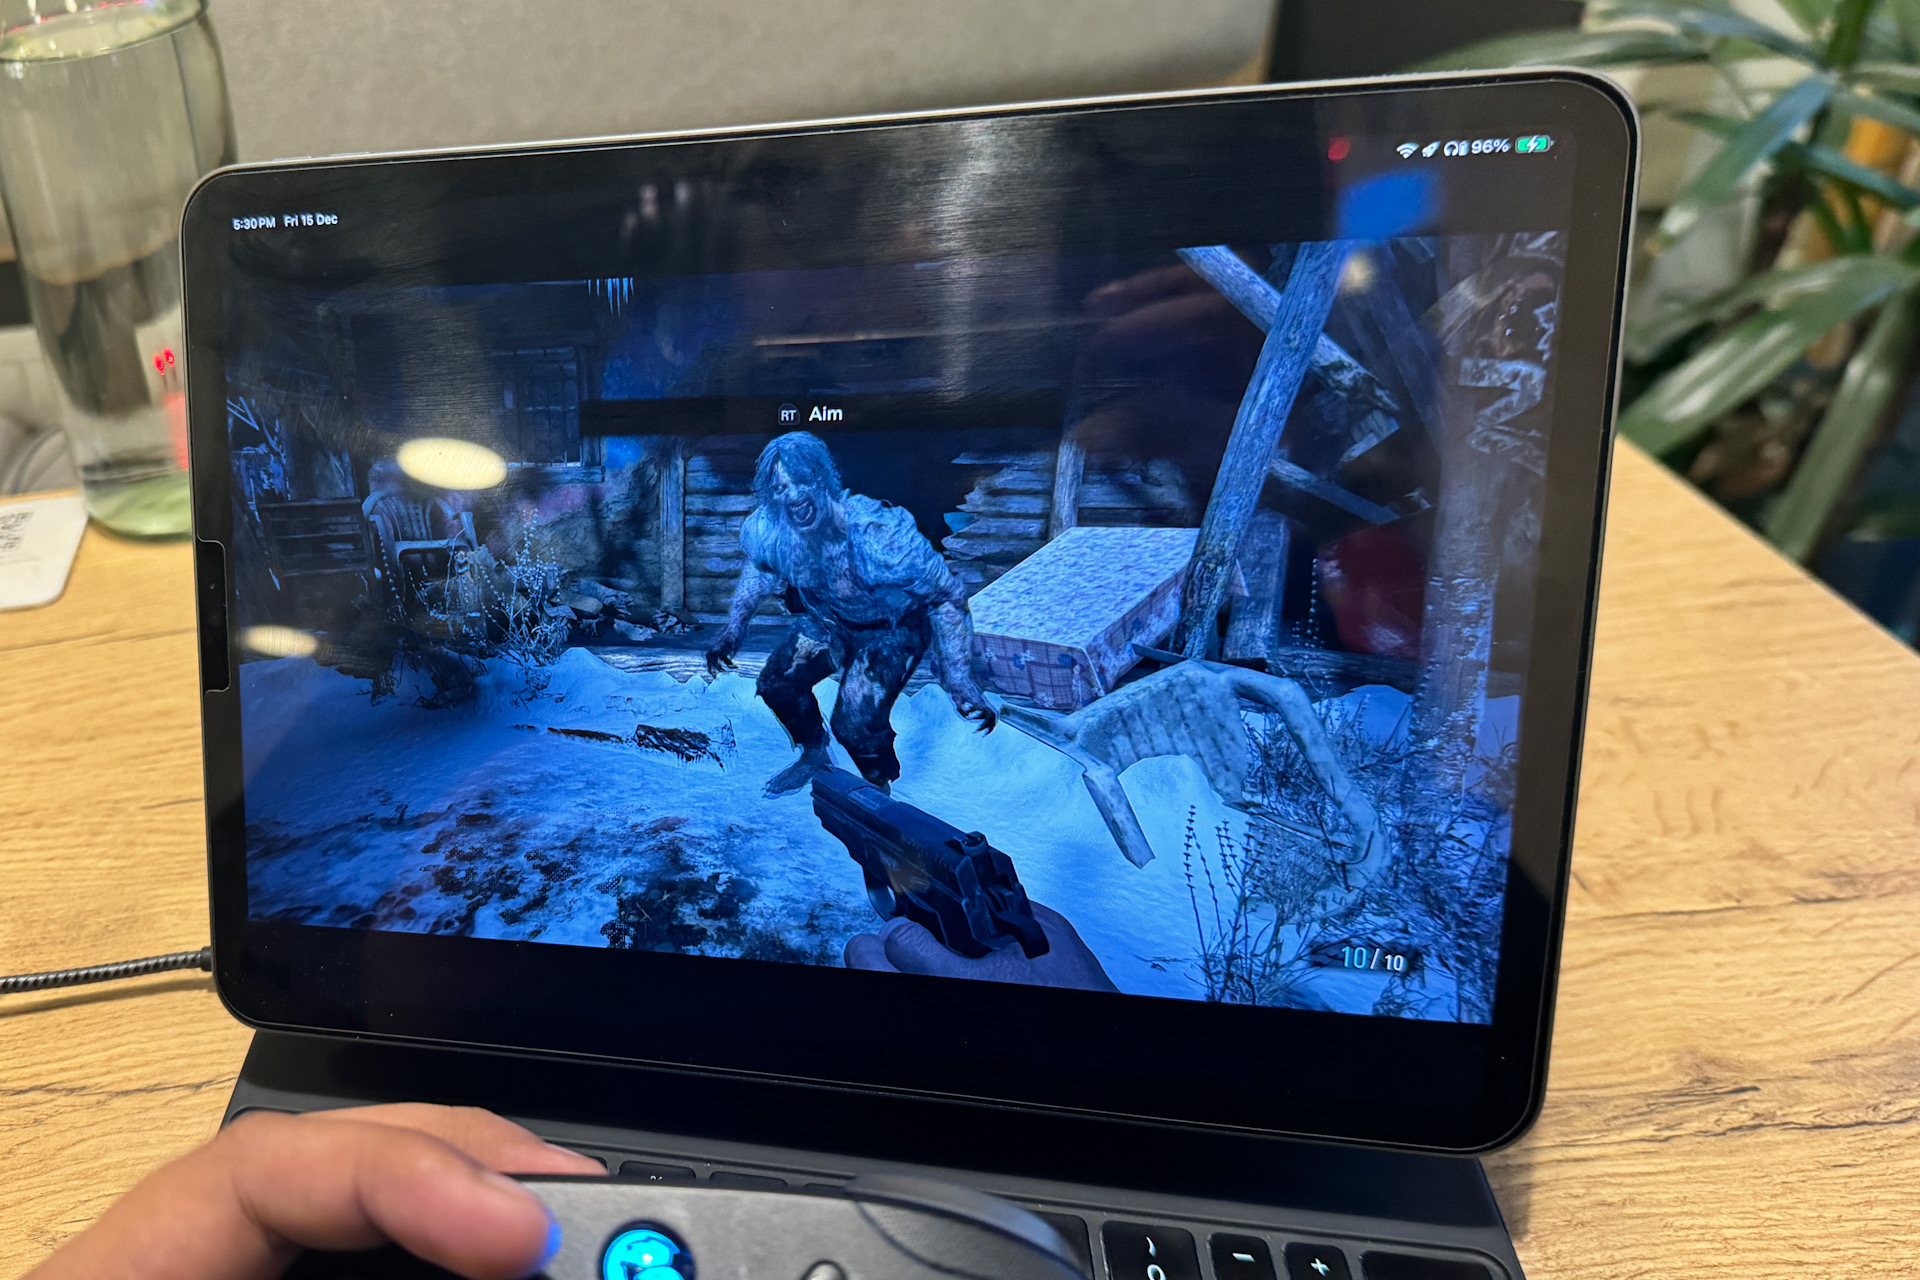 Facing a monster in Resident Evil Village on iPad Pro.